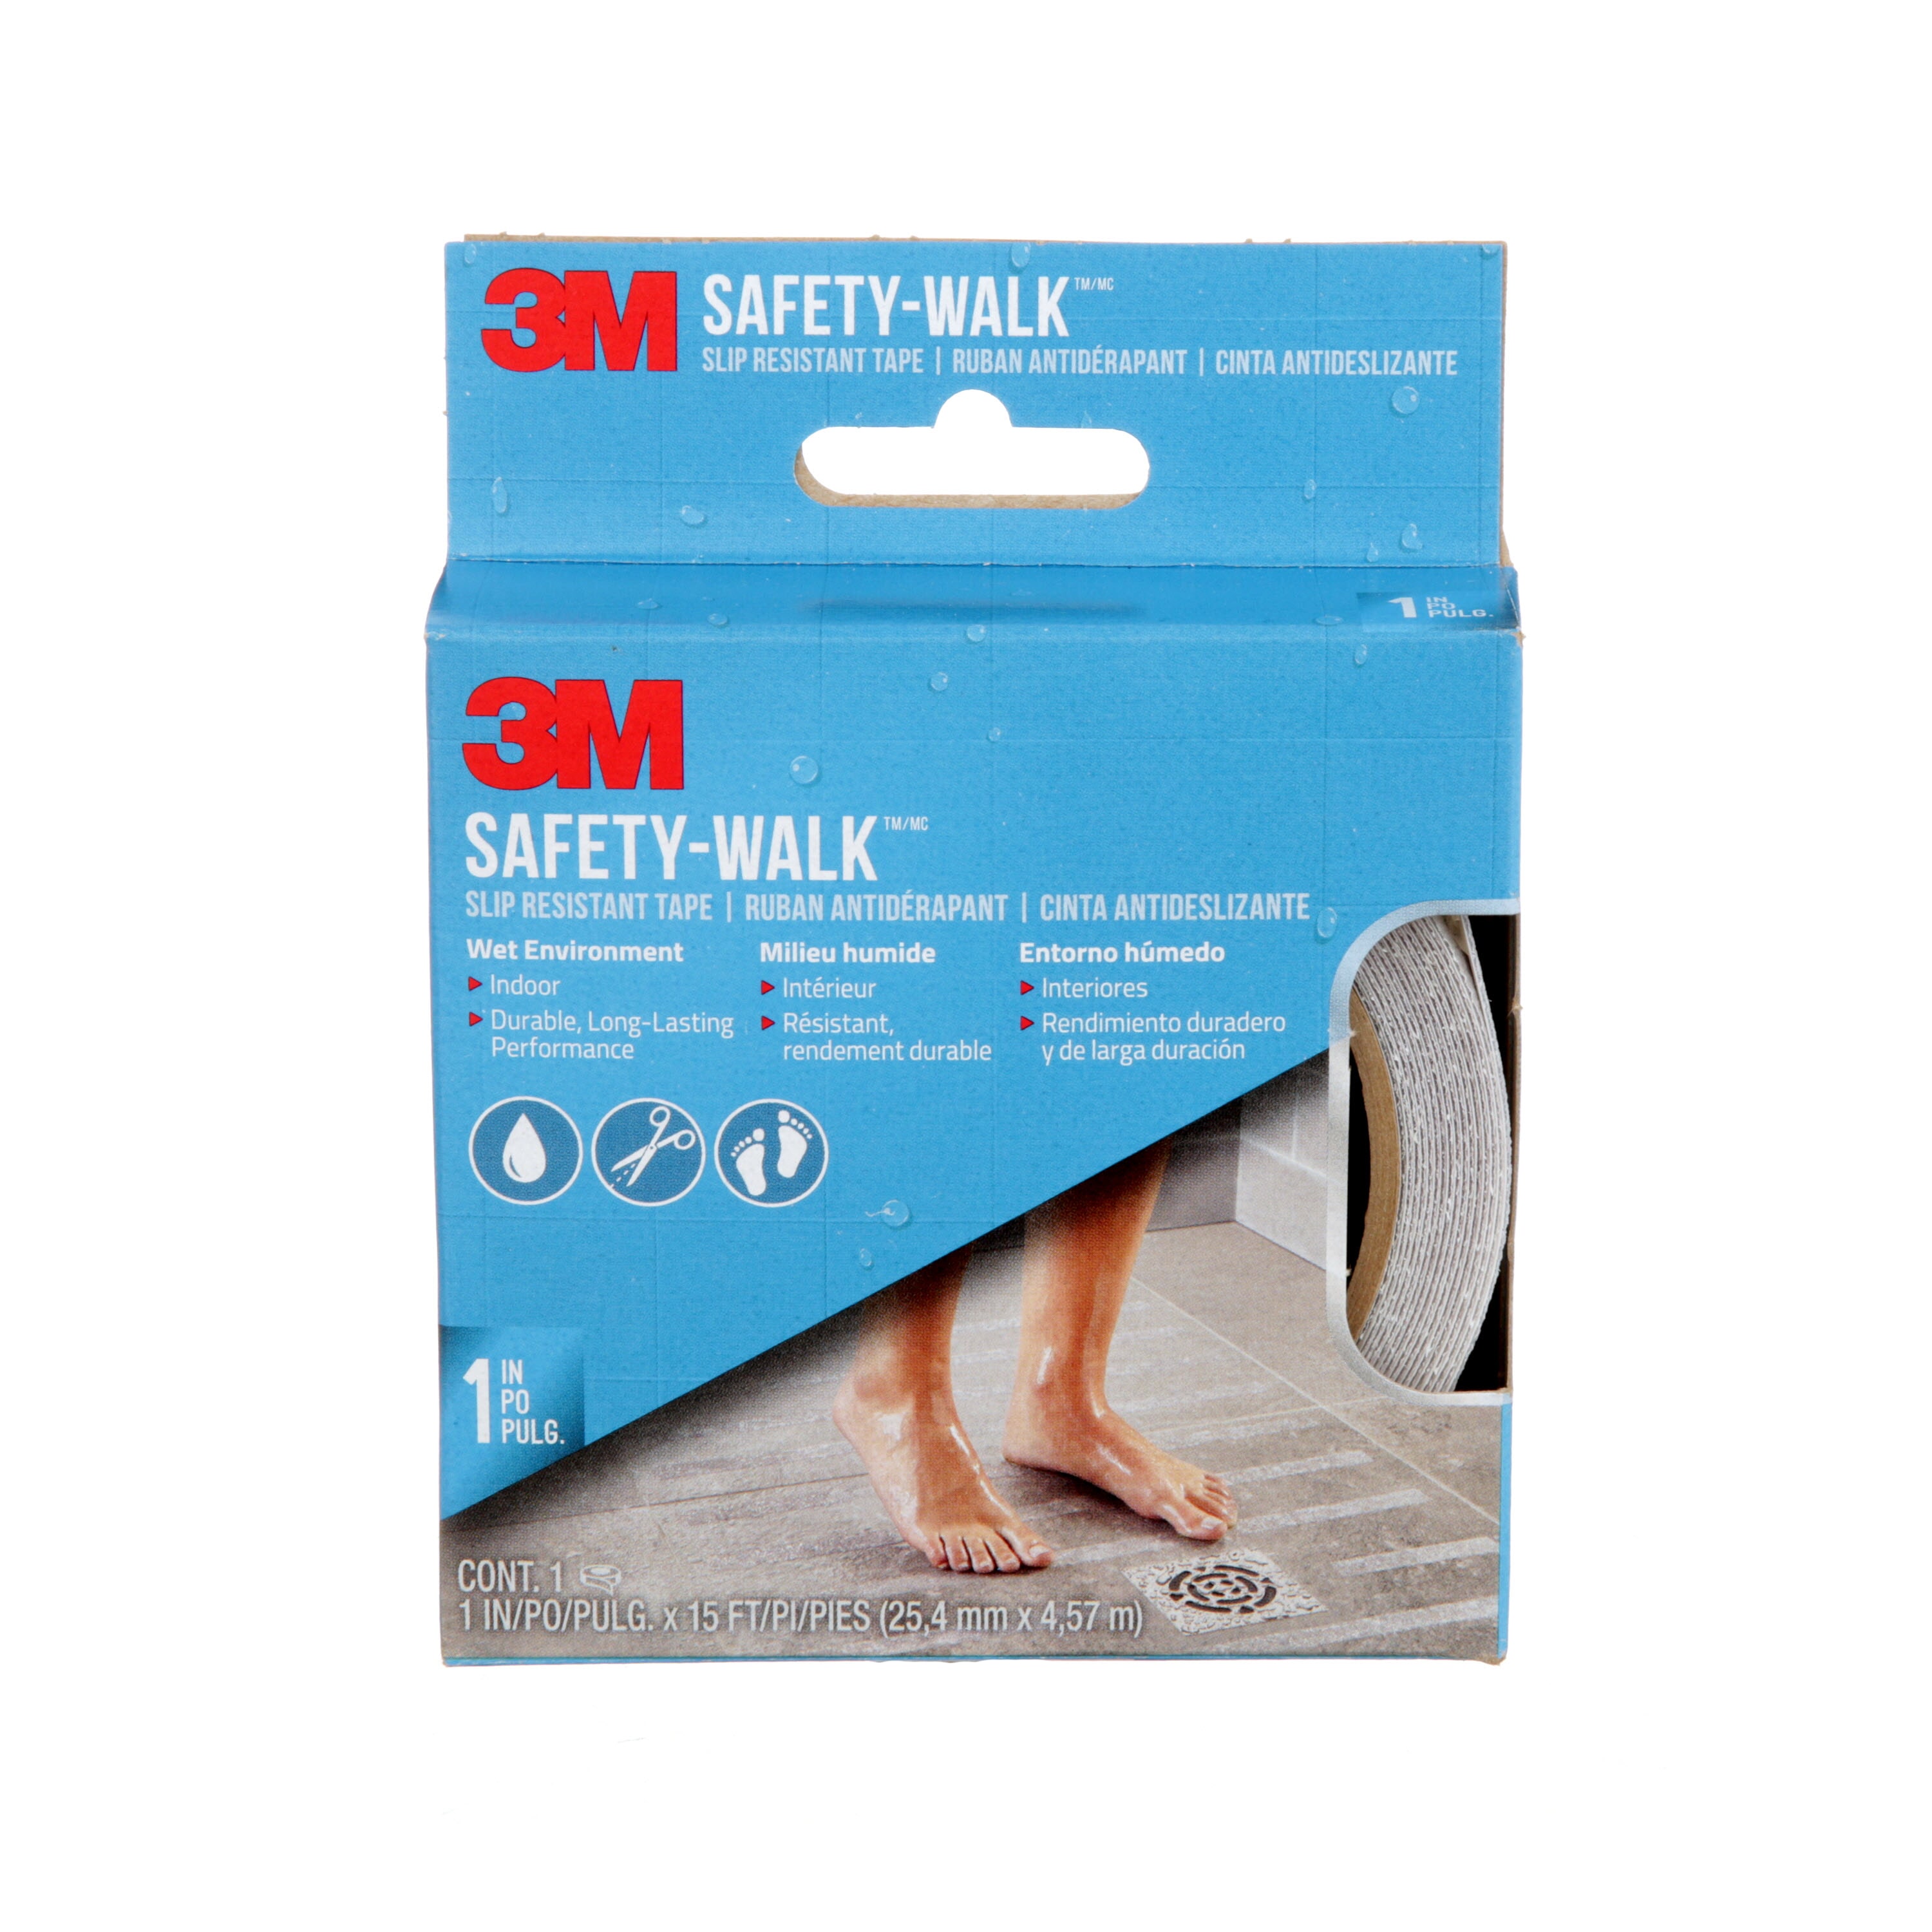 Safety-Walk 7100173148 Slip Resistant Tape, 180 in L x 1 in W, Wet Surface